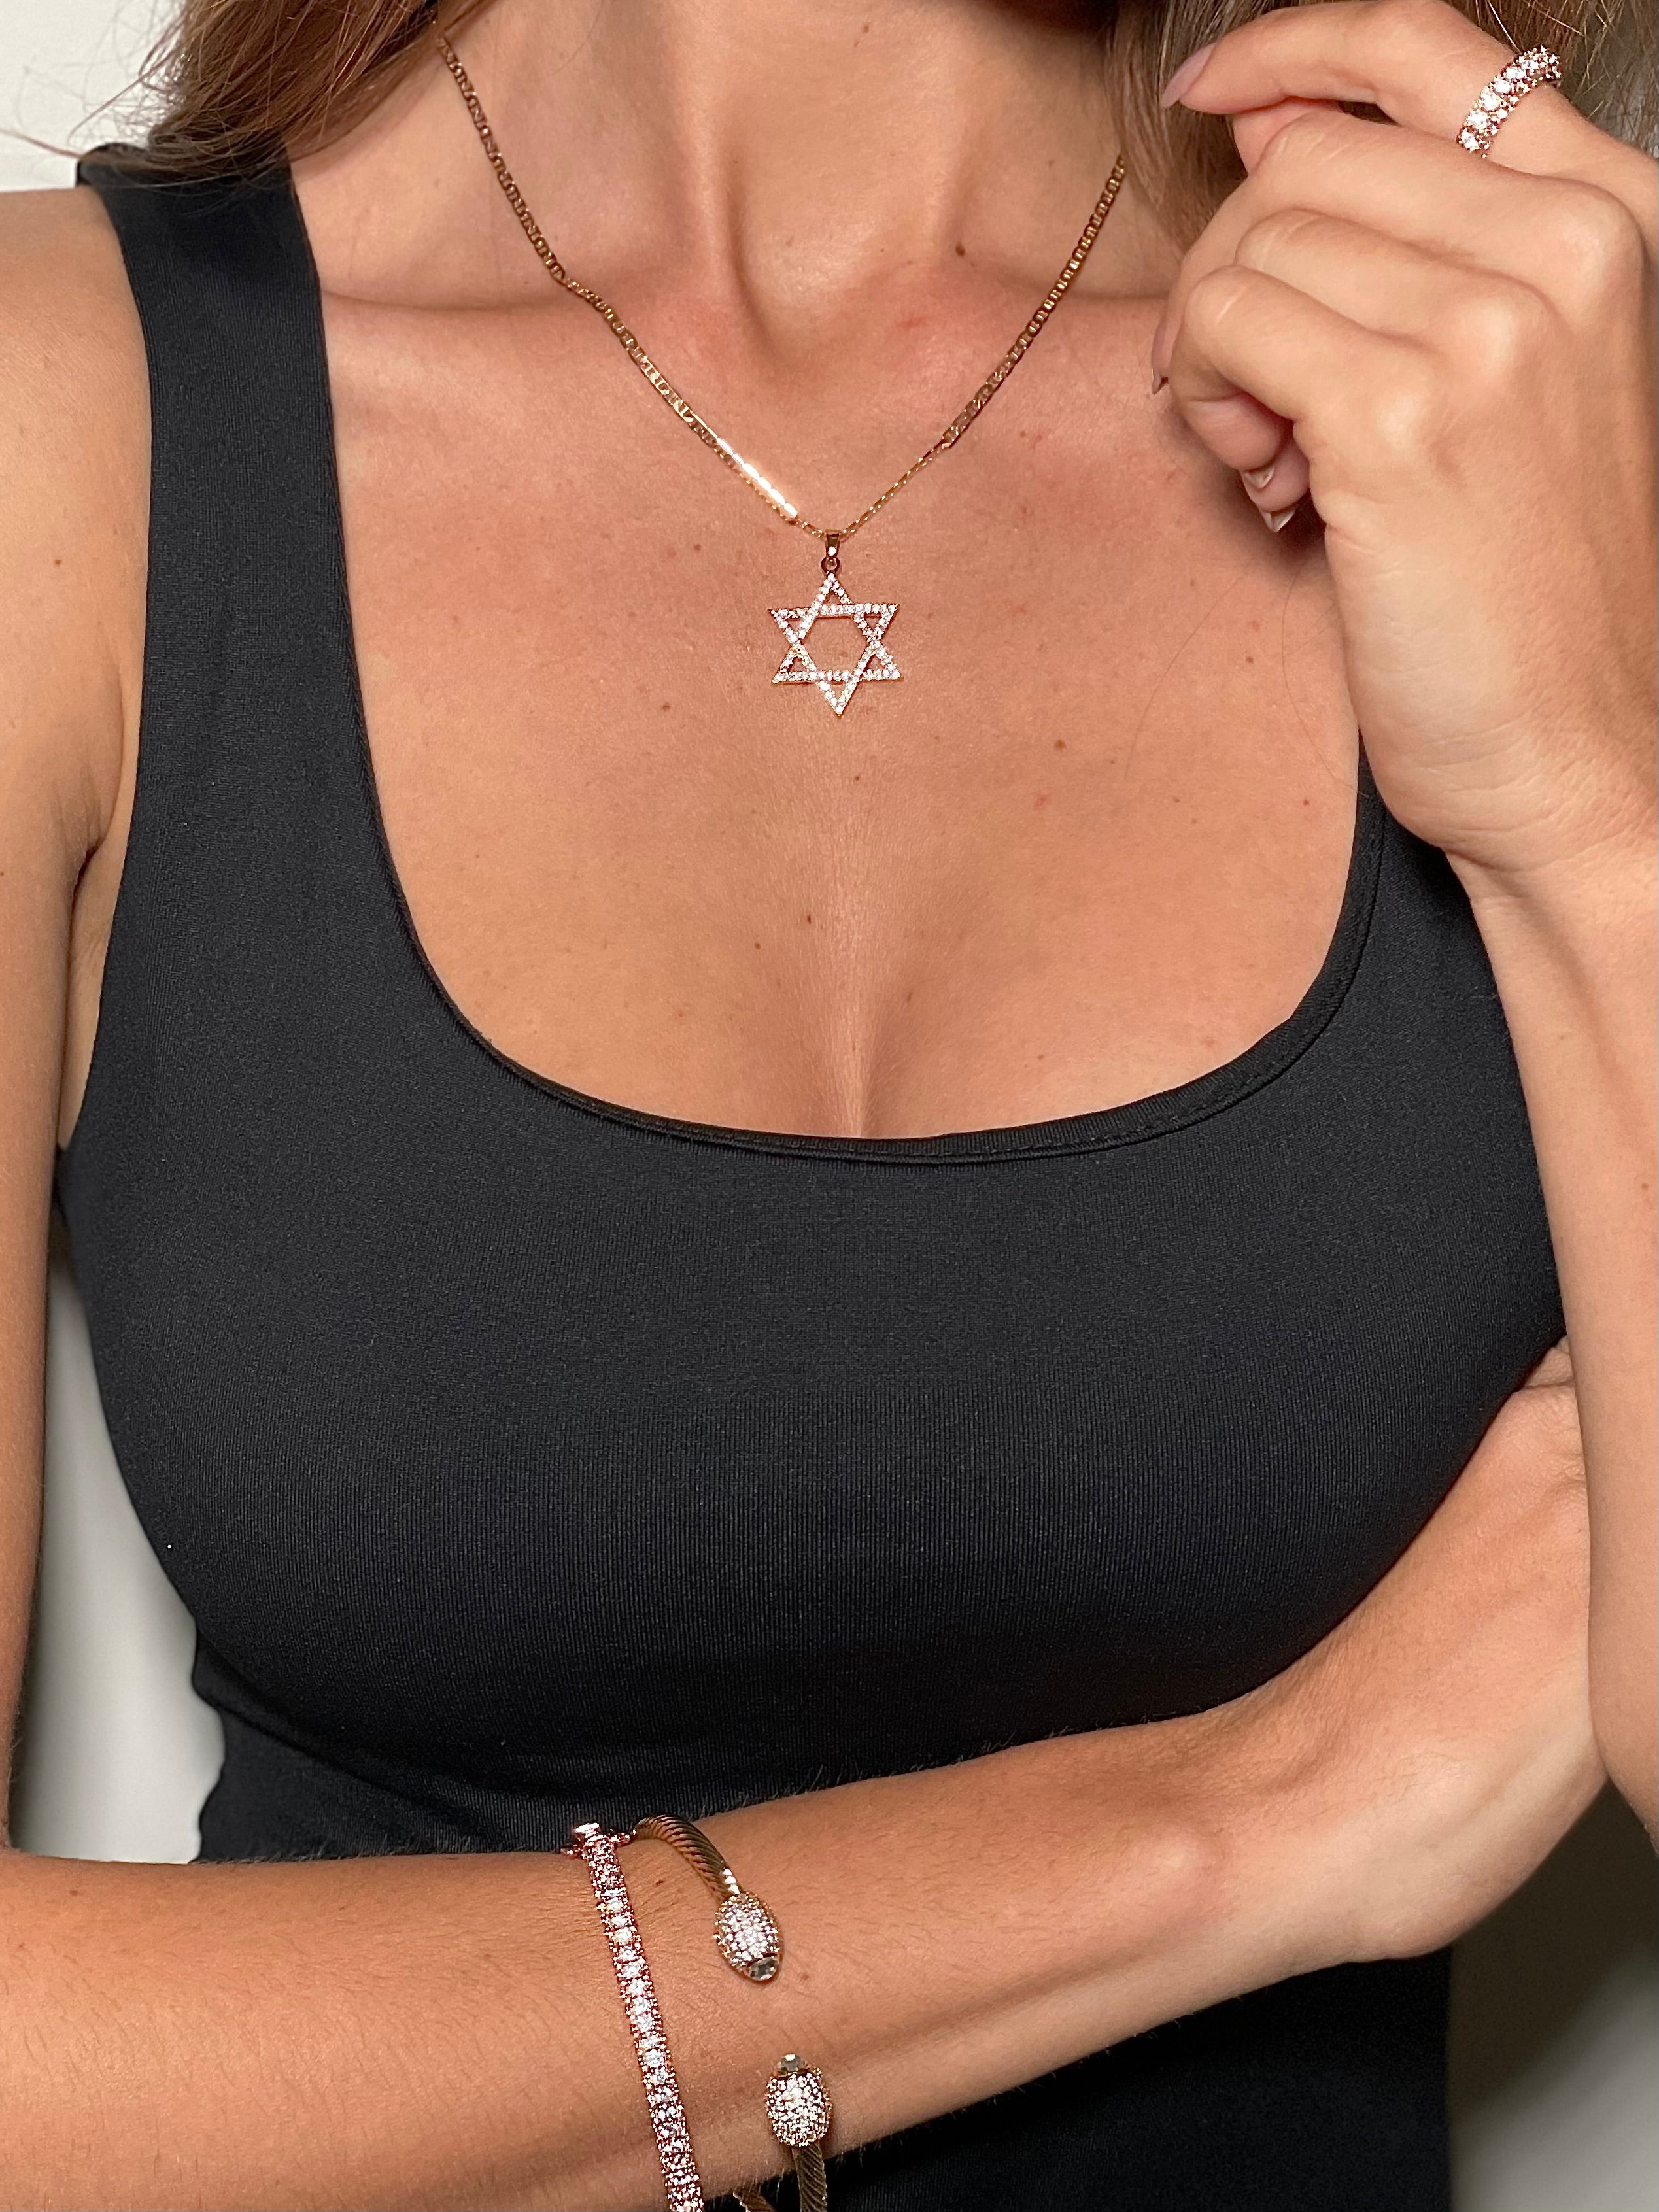 18K Gold Plated Crystal Star of David Charm Necklace